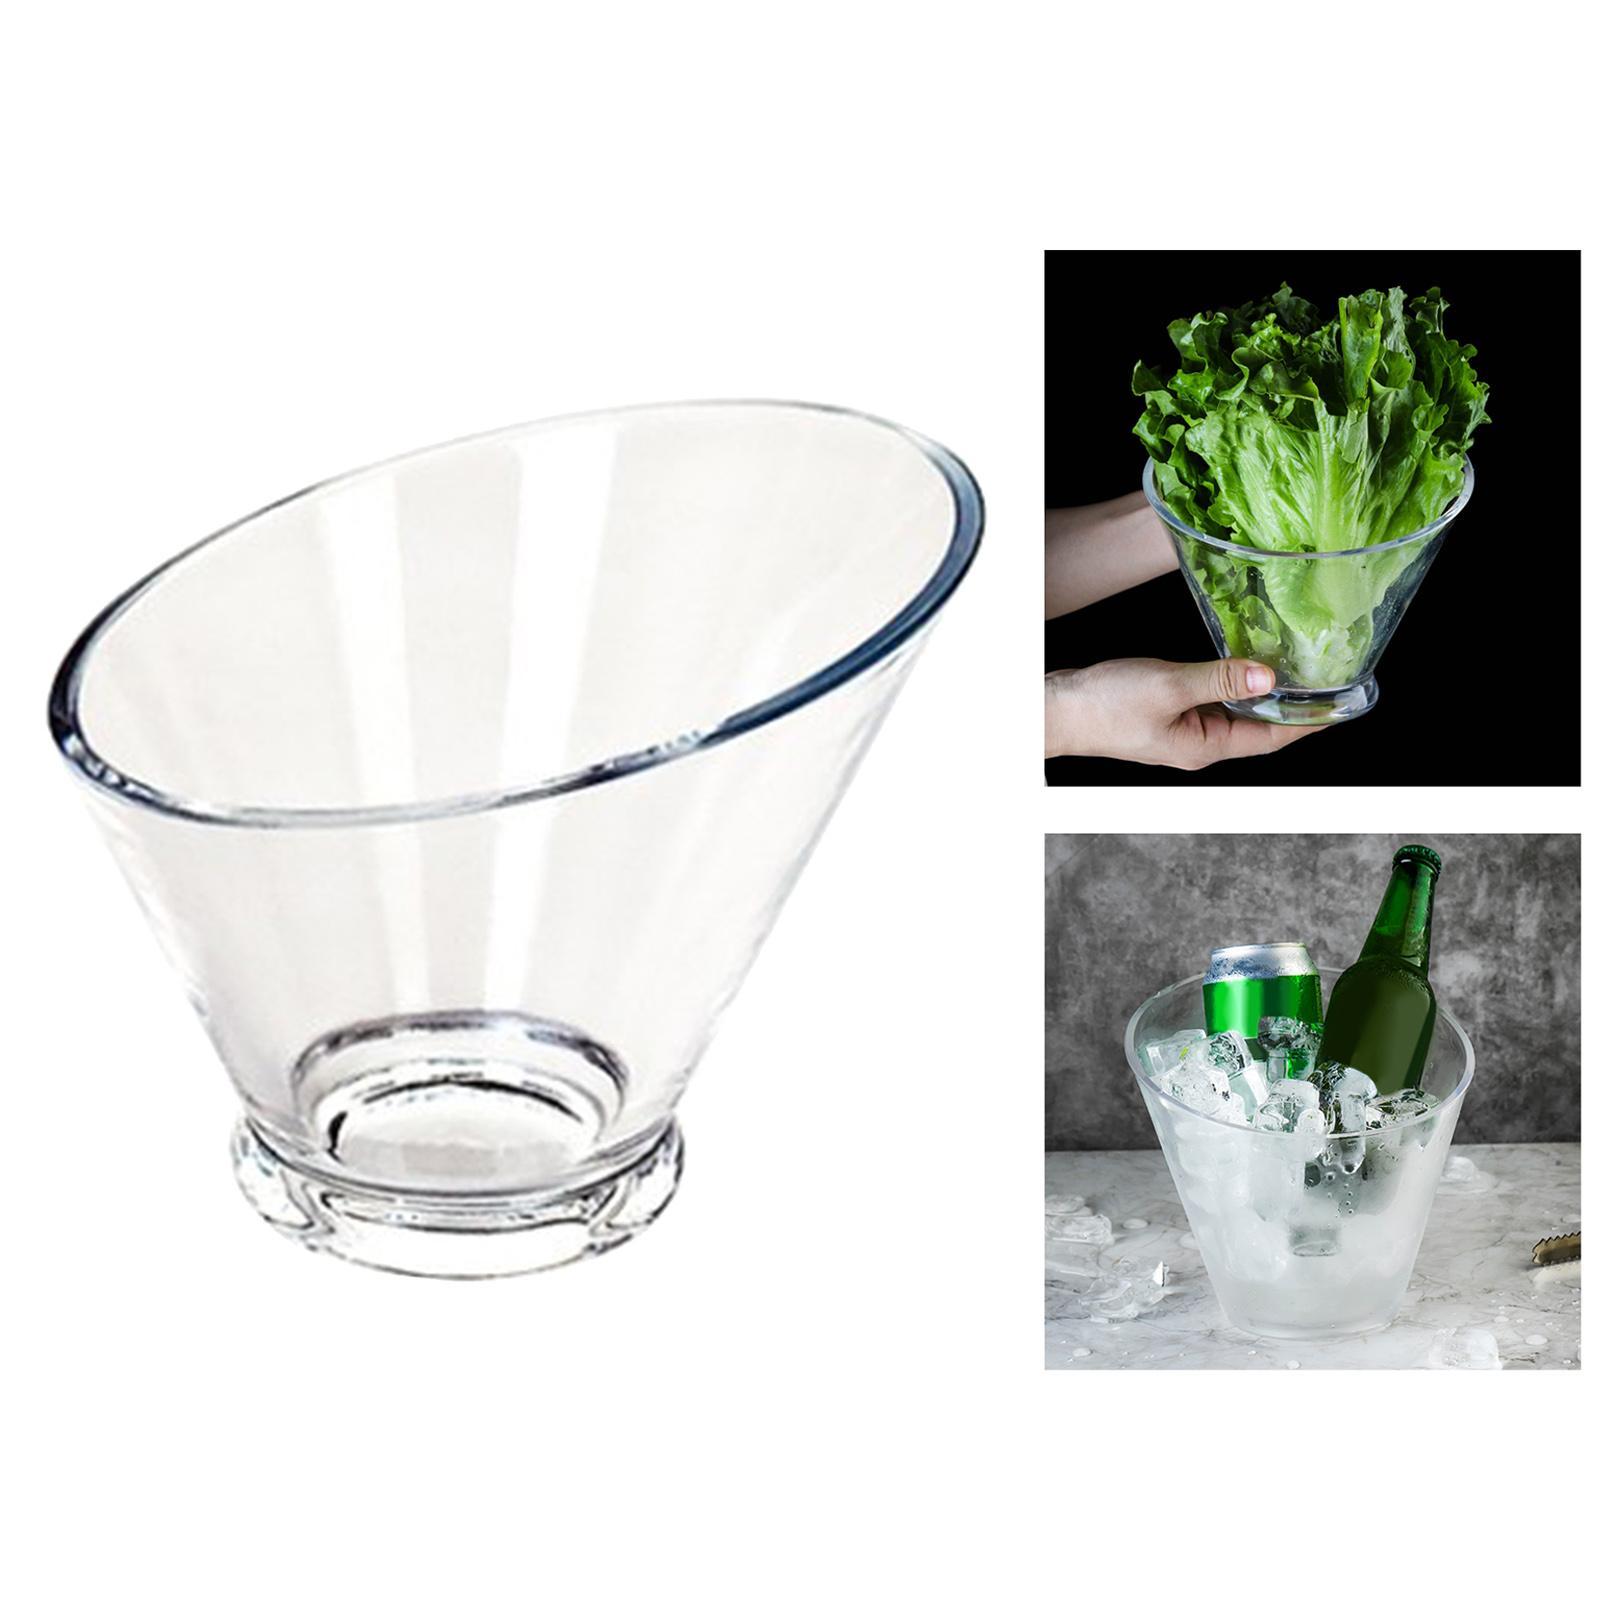 2Pcs Clear Acrylic Salad Bowl Angled Light Weight for Appetizer Family Party